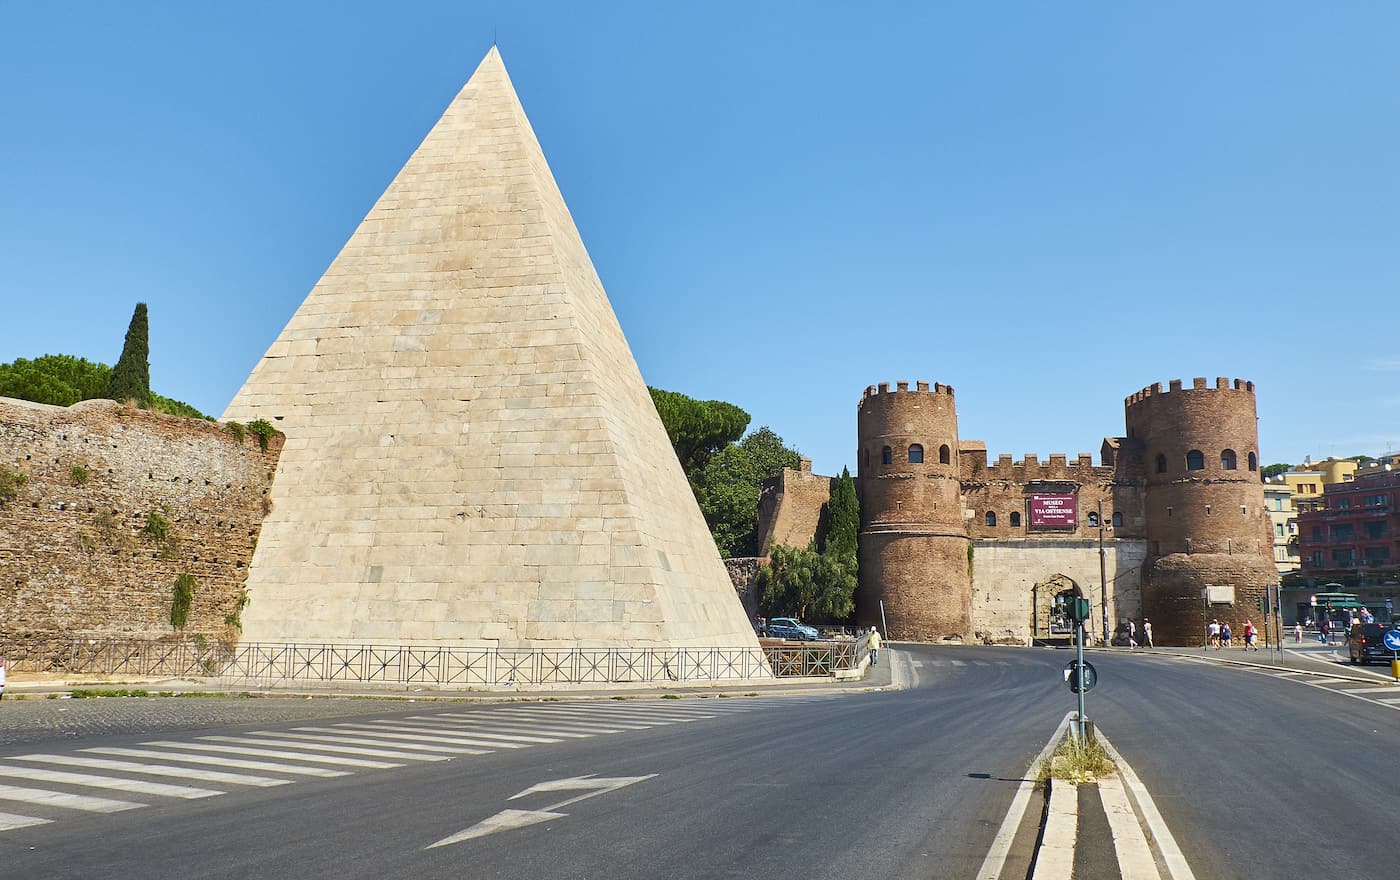  The Pyramid of Cestius and Porta San Paolo gate in background. View from Piazzale Ostiense square.